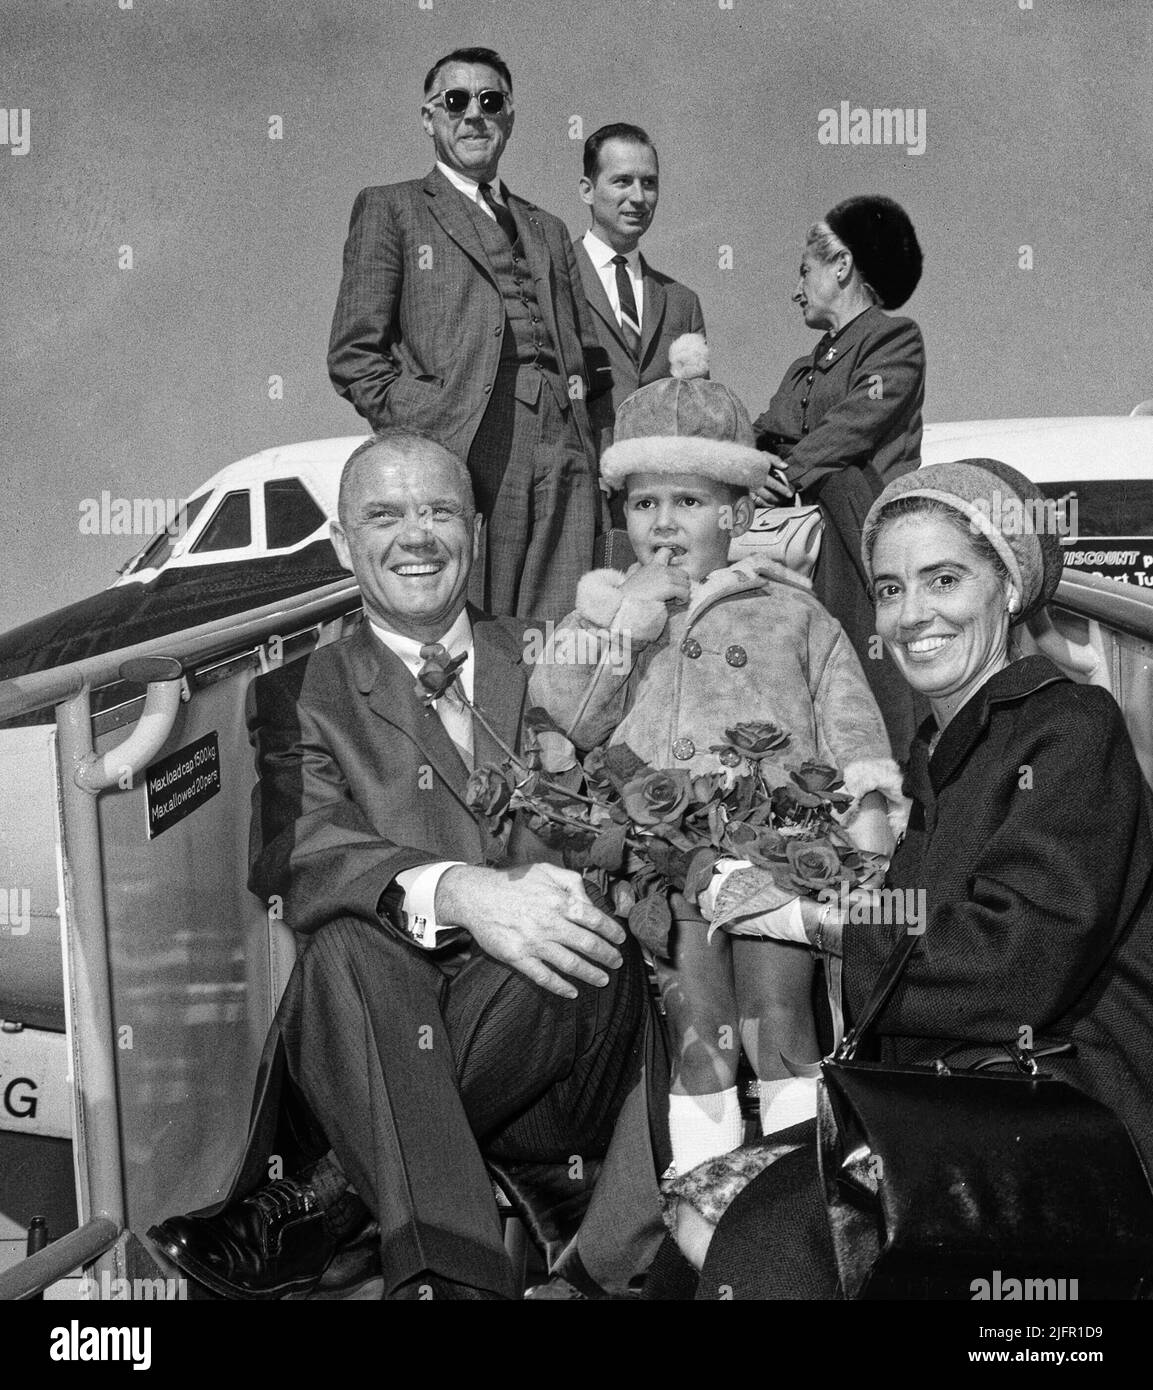 American astronaut John Glenn (left) and wife Annie Glenn pose for a photograph with an unidentified boy upon arrival at Amsterdam Airport Schiphol on Saturday, Oct. 9, 1965 in Haarlemmermeer, North Holland, Netherlands. A distinguished U.S. Marine Corps fighter pilot and one of the National Aeronautics and Space Administration's original seven Project Mercury astronauts, John Glenn made the first supersonic transcontinental flight across the United States in 1957 and became the first American to orbit the Earth in 1962. (Apex MediaWire Photo by Jack de Nijs/Algemeen Nederlandsch Fotobureau) Stock Photo